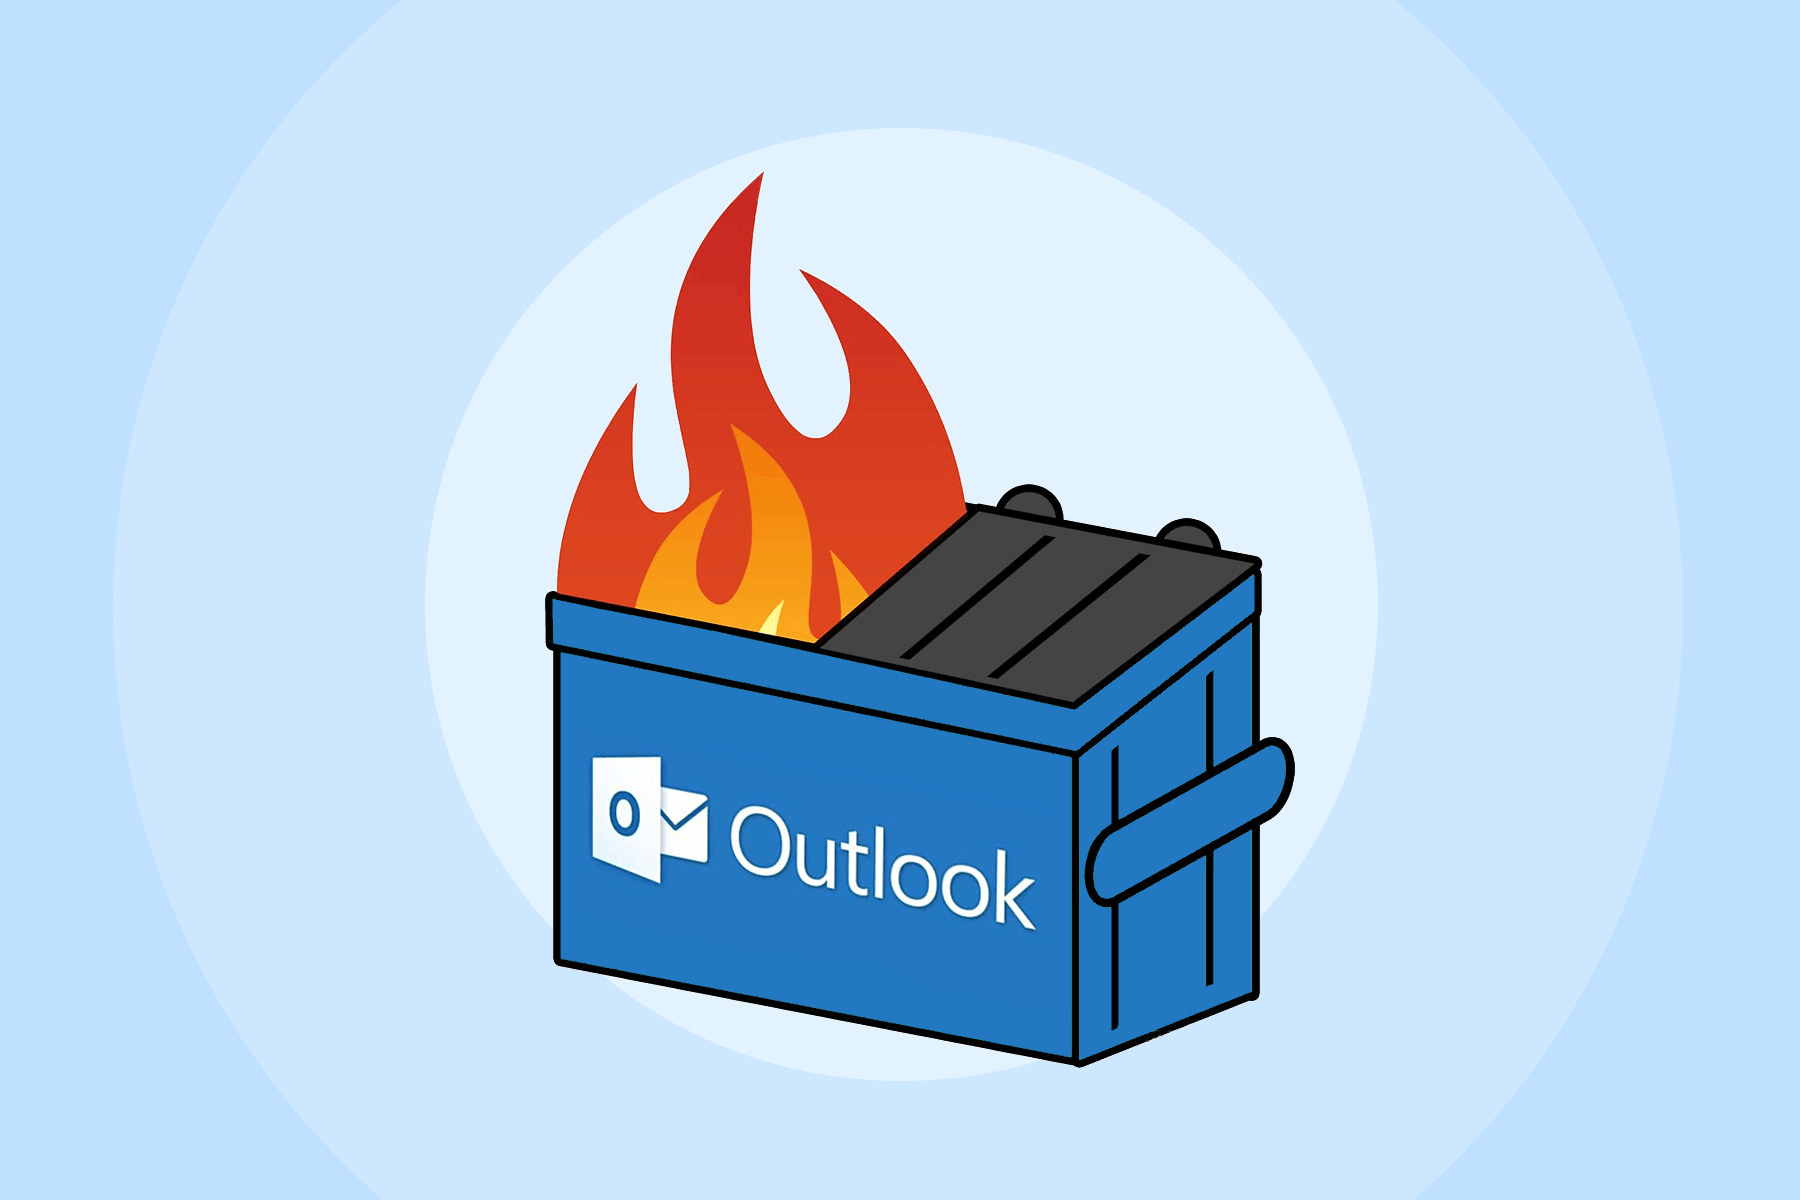 A dumpster fire illustration with the Outlook logo on the side of the dumpster.